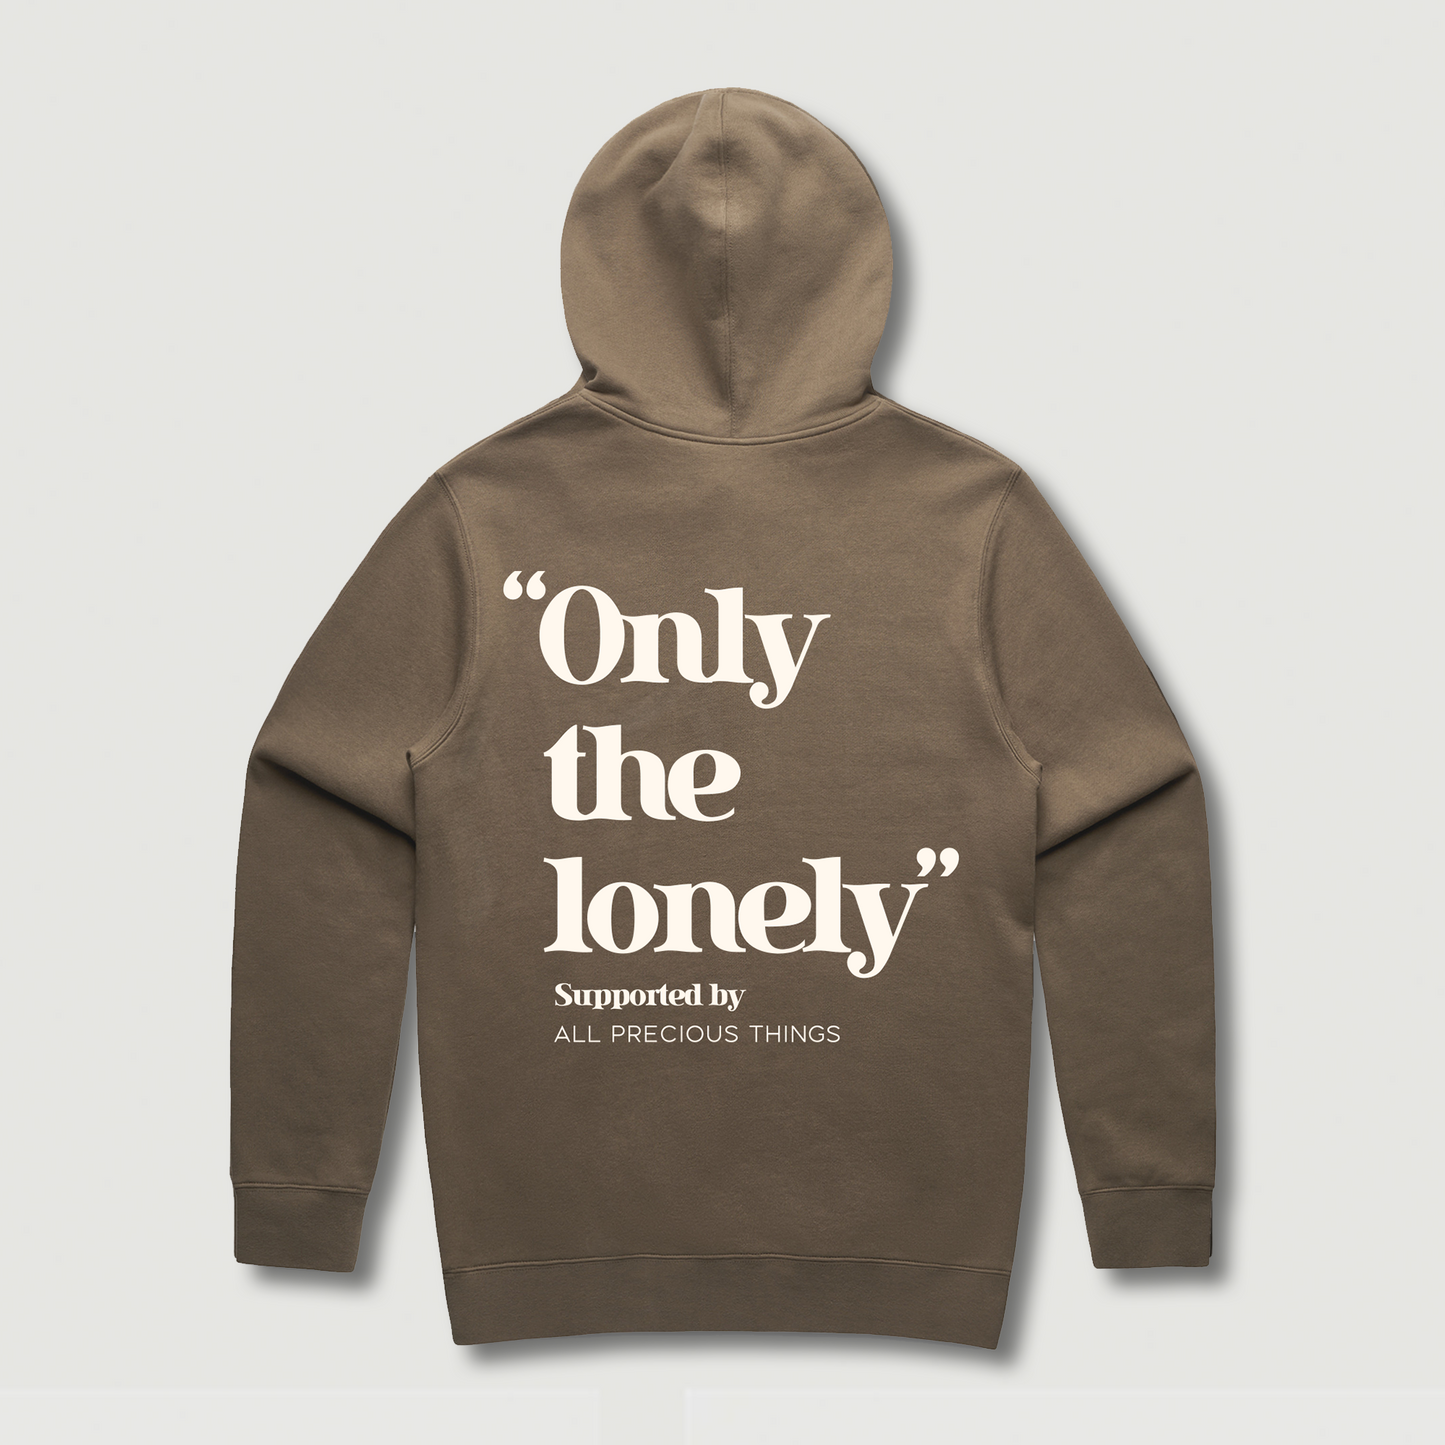 ONLY THE LONELY LOGO HOODIE (WALNUT/CREAM)